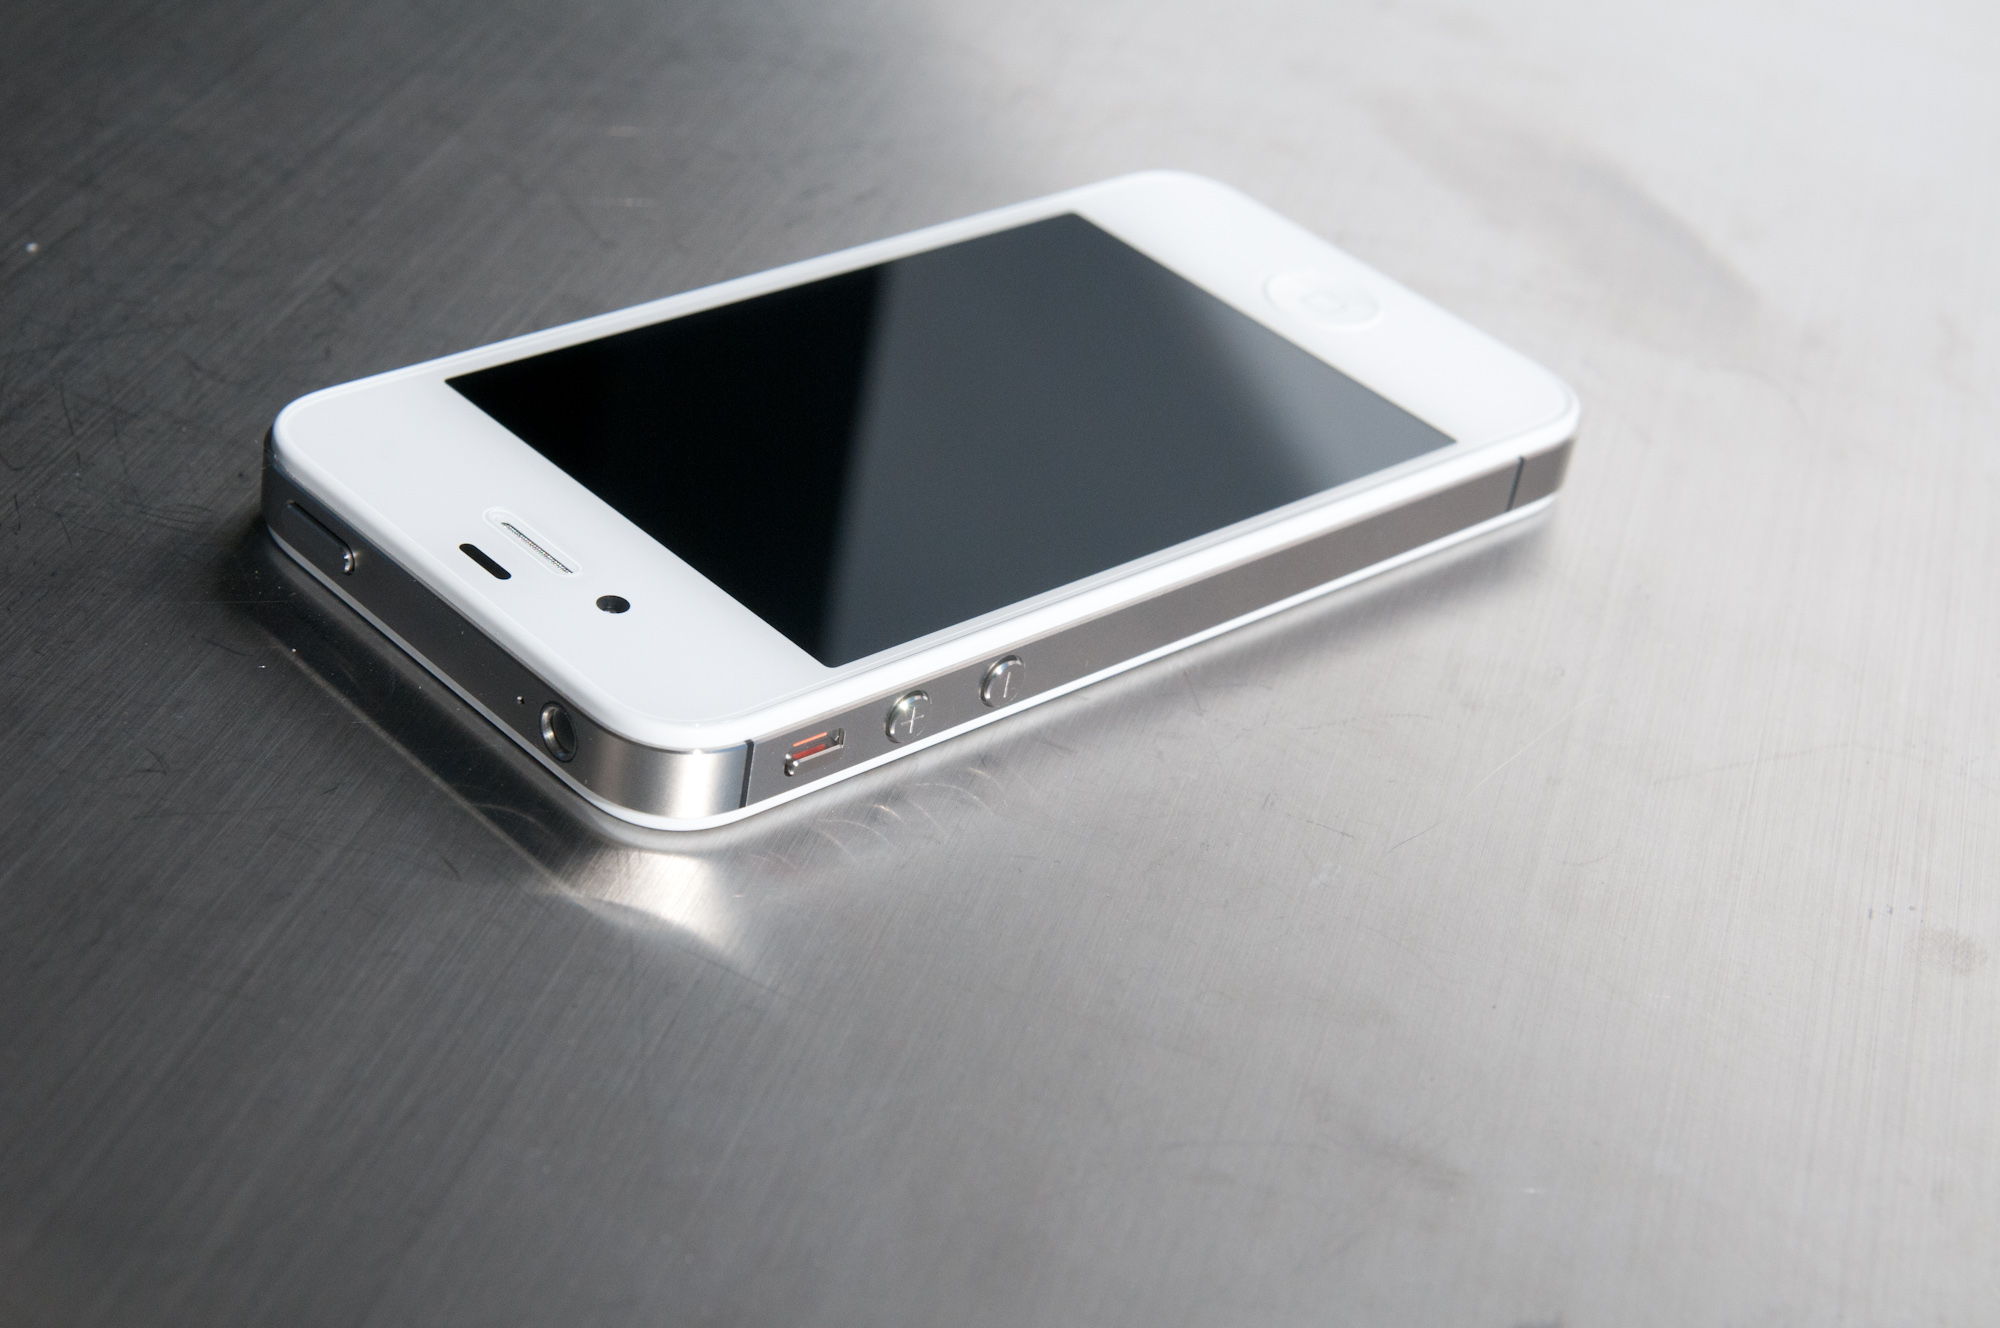 Apple iPhone 4S: Thoroughly Reviewed